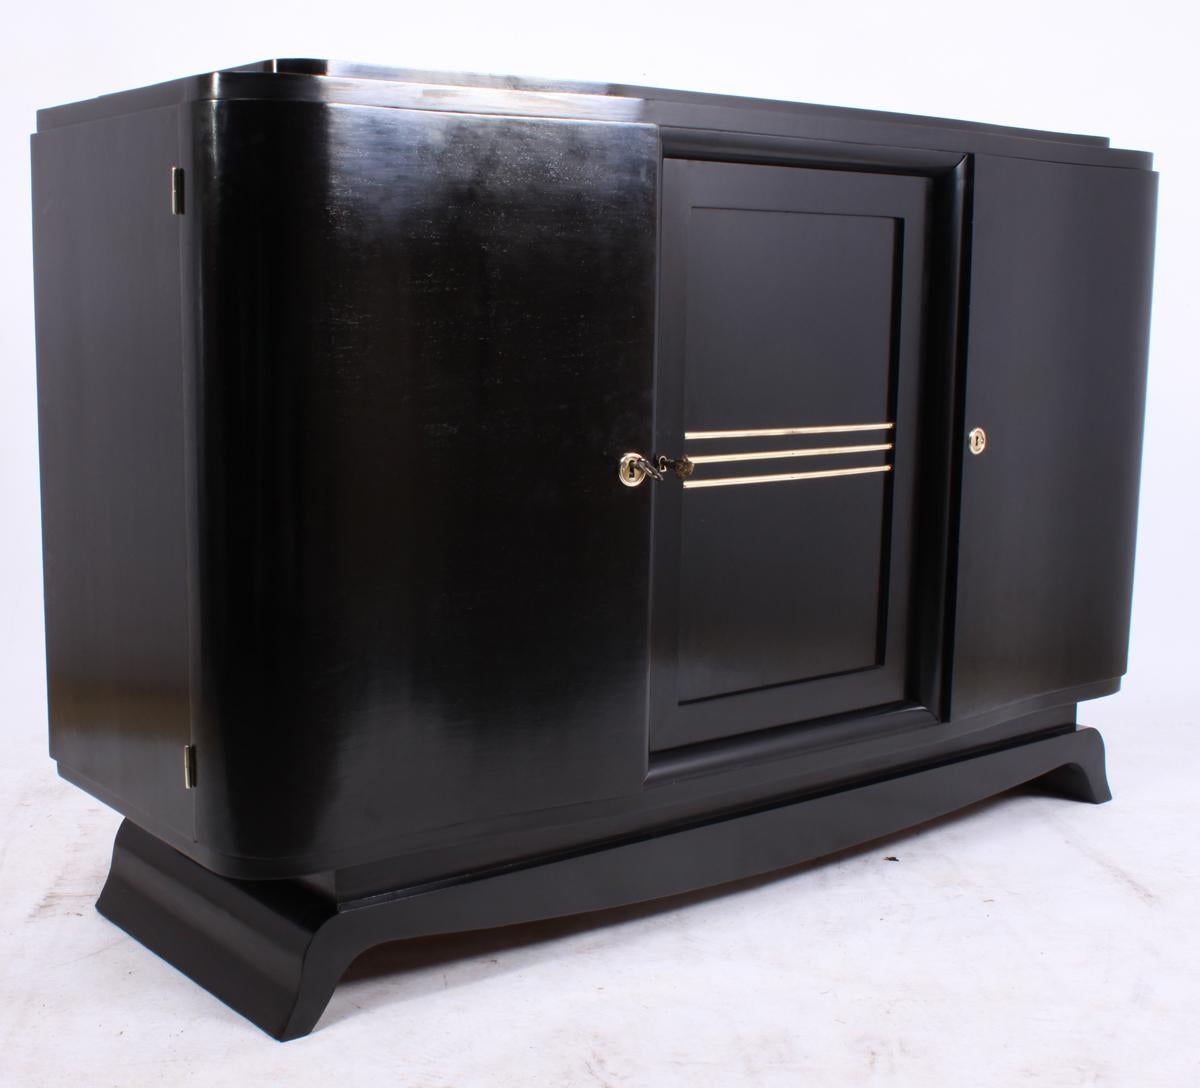 Art Deco piano lacquer black sideboard
A French Art Deco sideboard with three doors in a ebonized piano lacquer finish having brass detail doors and locks all working with 2 keys supplied very good condition throughout

The sideboard can